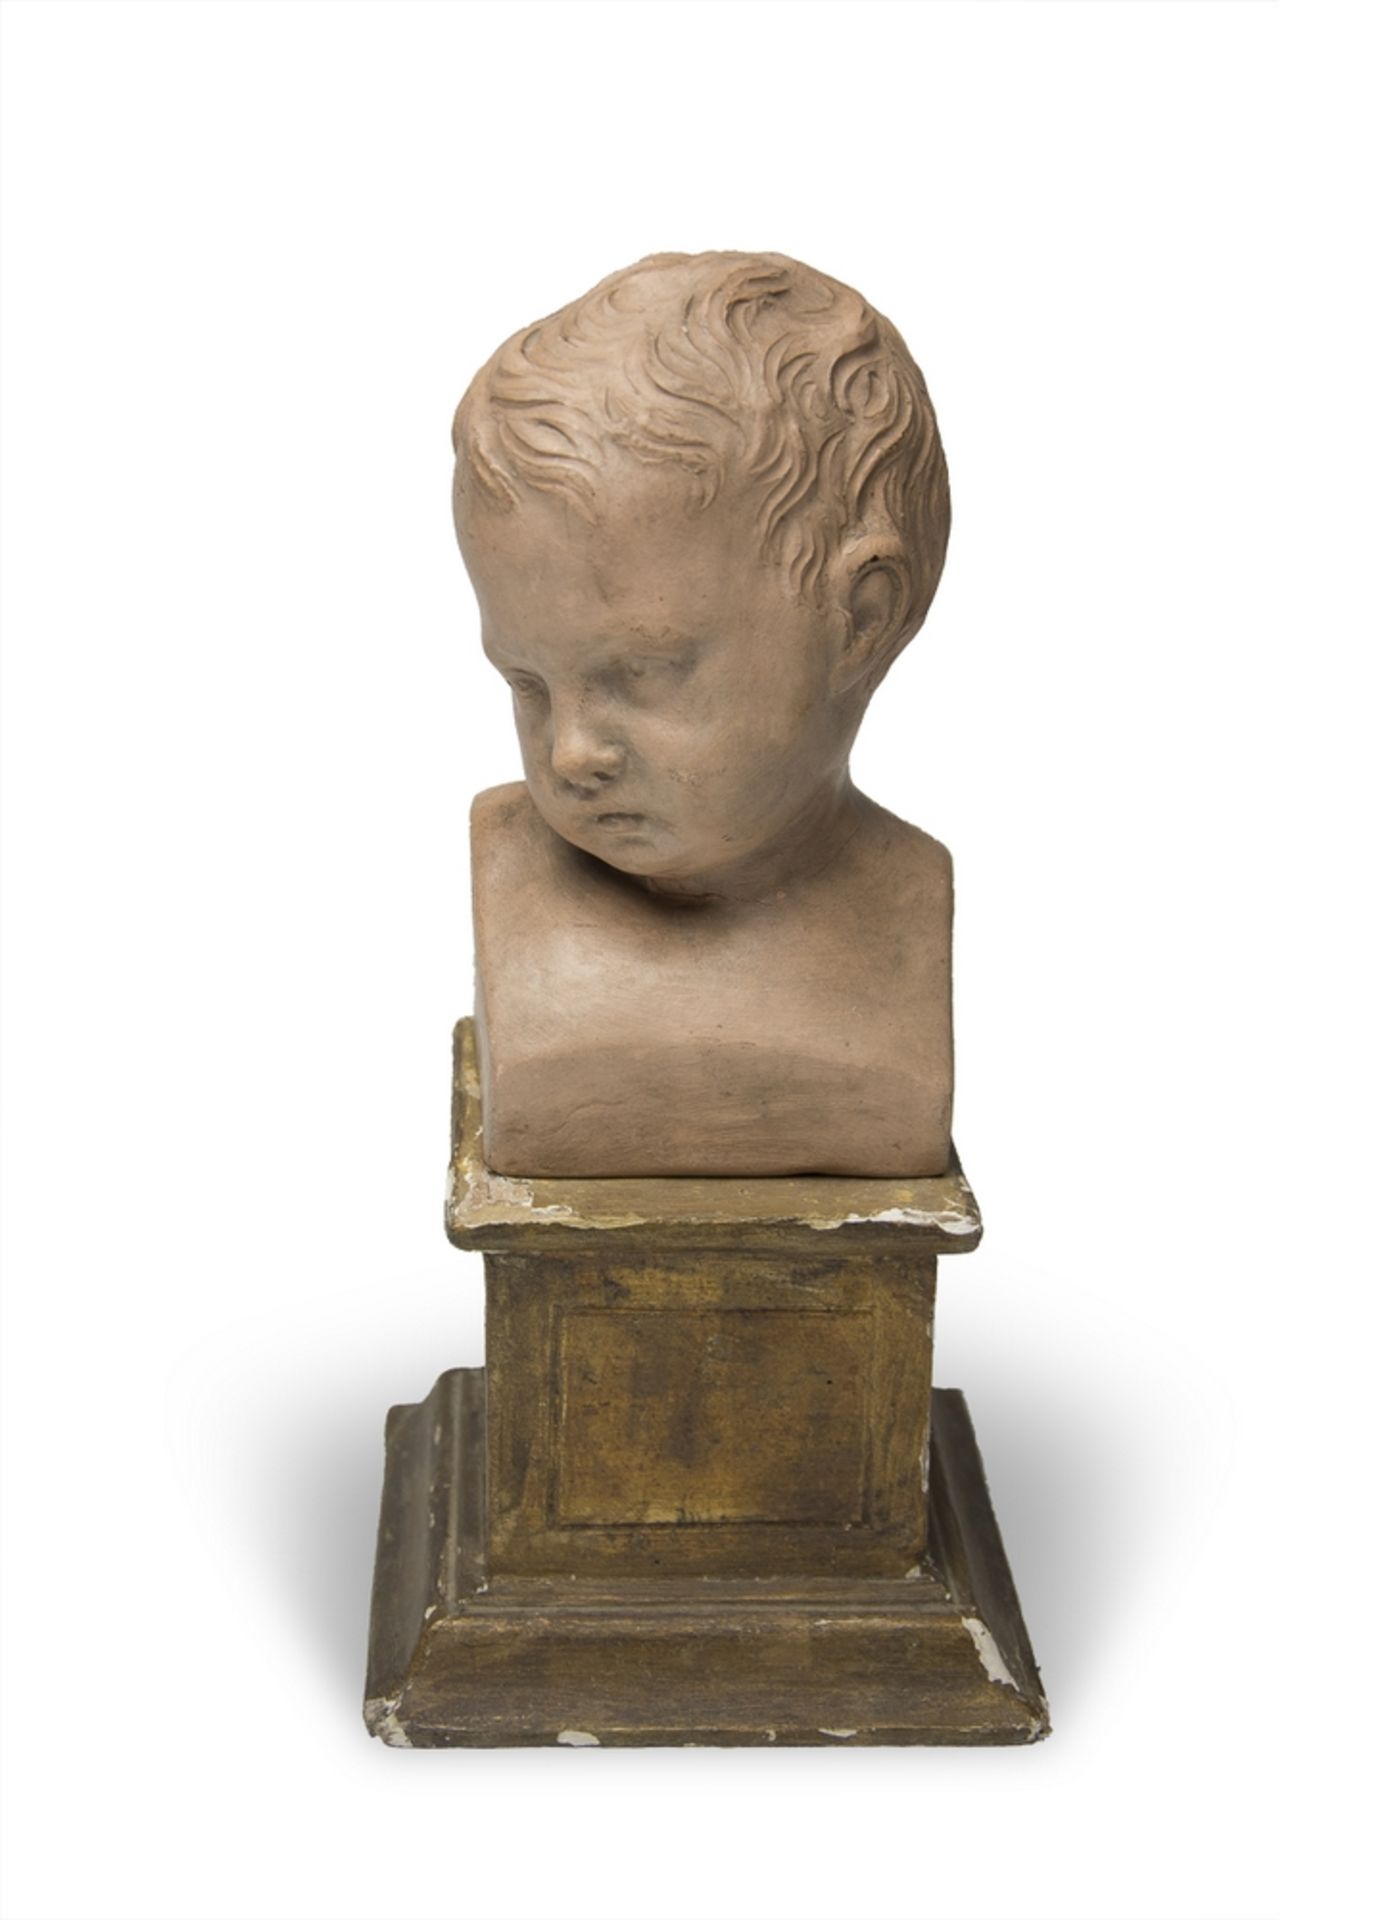 SMALL EARTHENWARE HEAD, EARLY 20TH CENTURY complete with gilded wooden base. Measures cm. 20 x 11